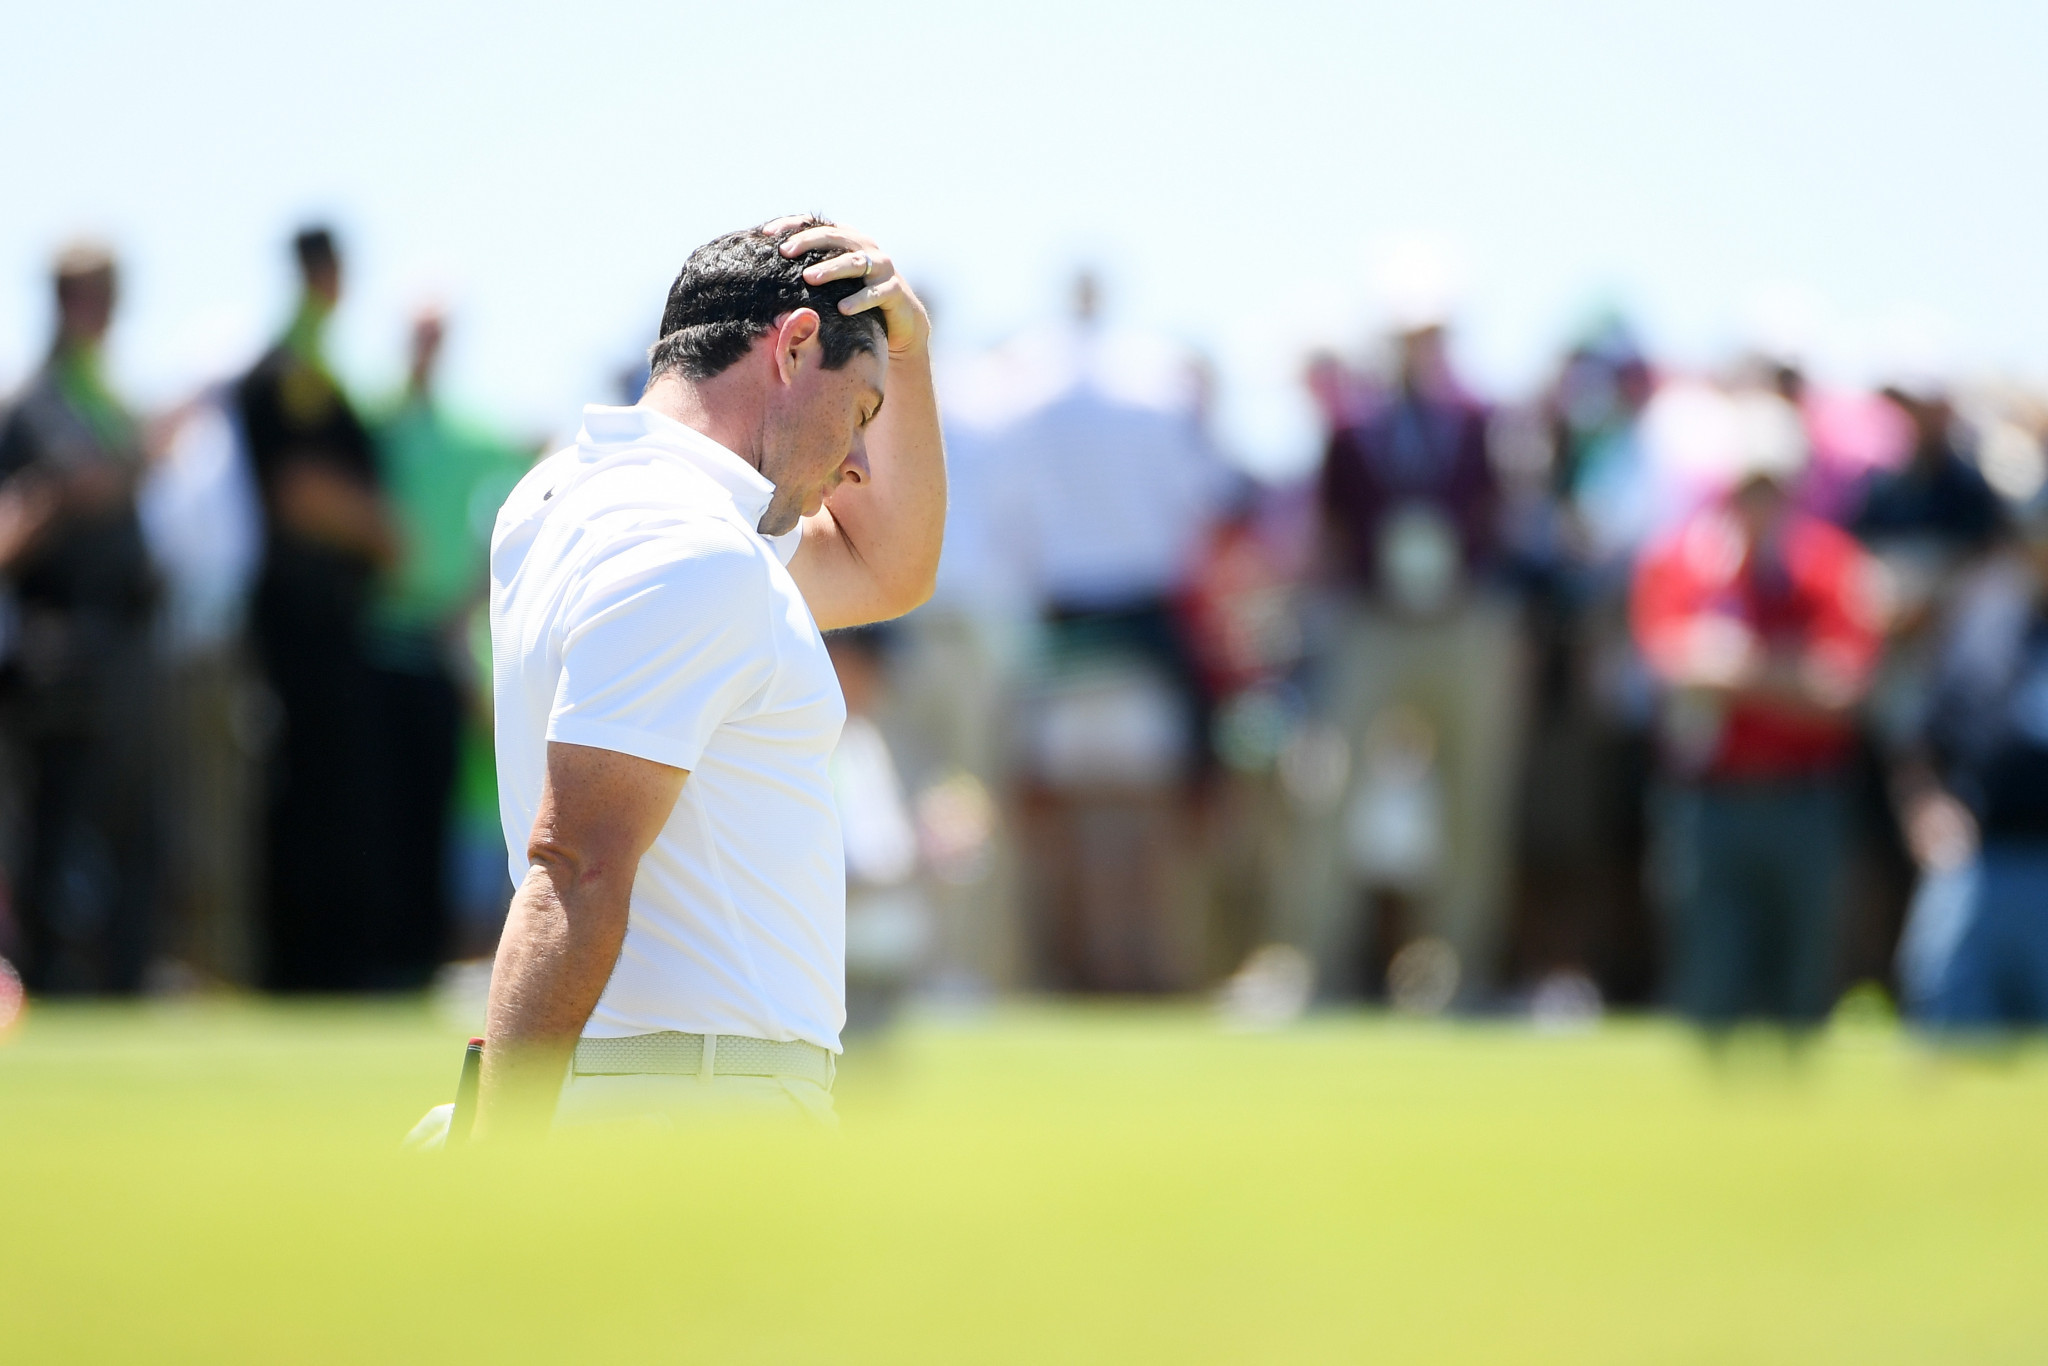 Rory McIlroy endured a difficult opening round to finish 11 shots off the lead ©Getty Images